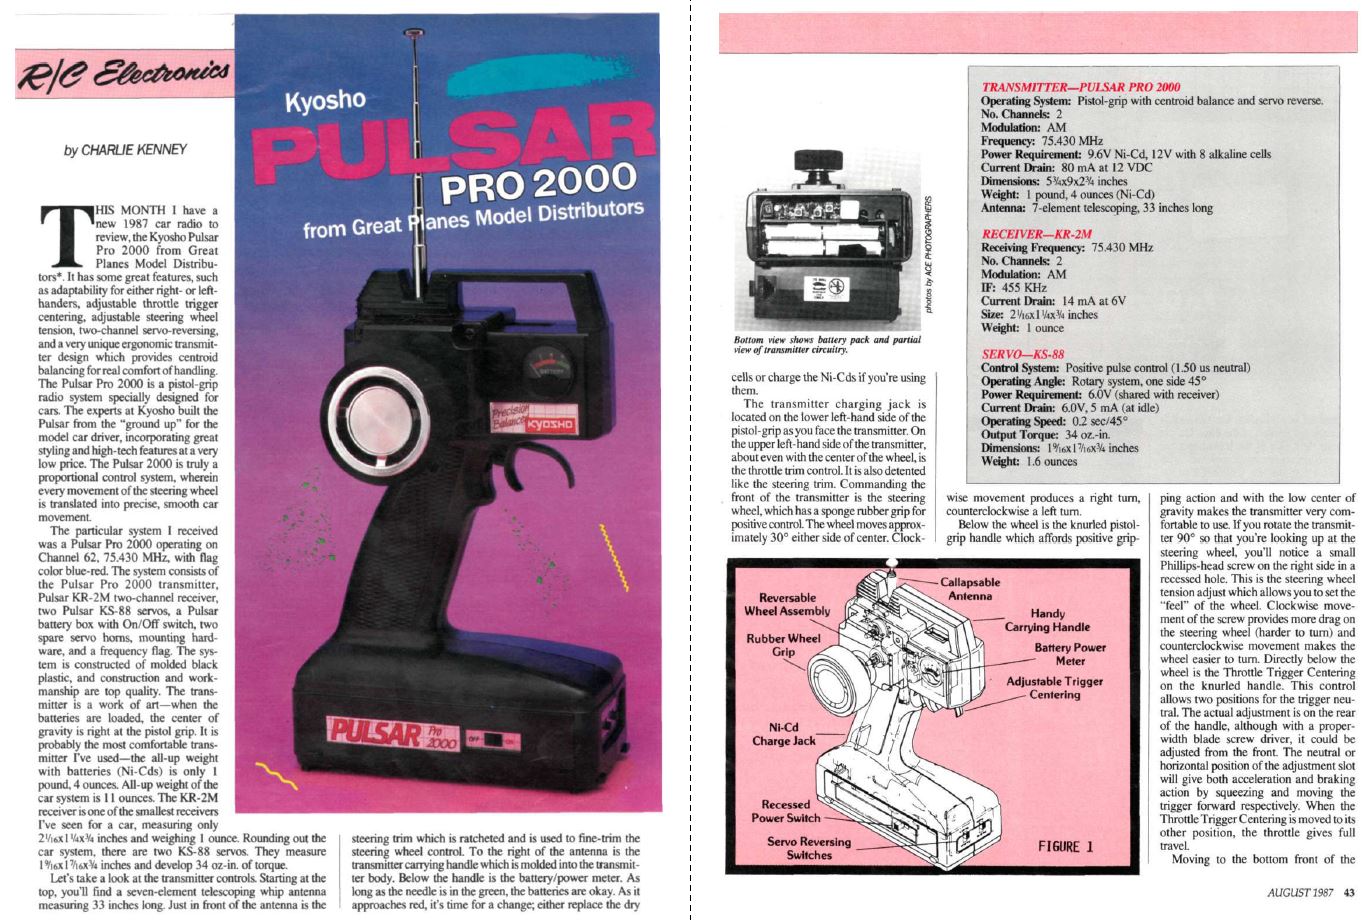 #TBT Kyosho Pulsar Pro 2000 Radio Reviewed in August 1987 Issue